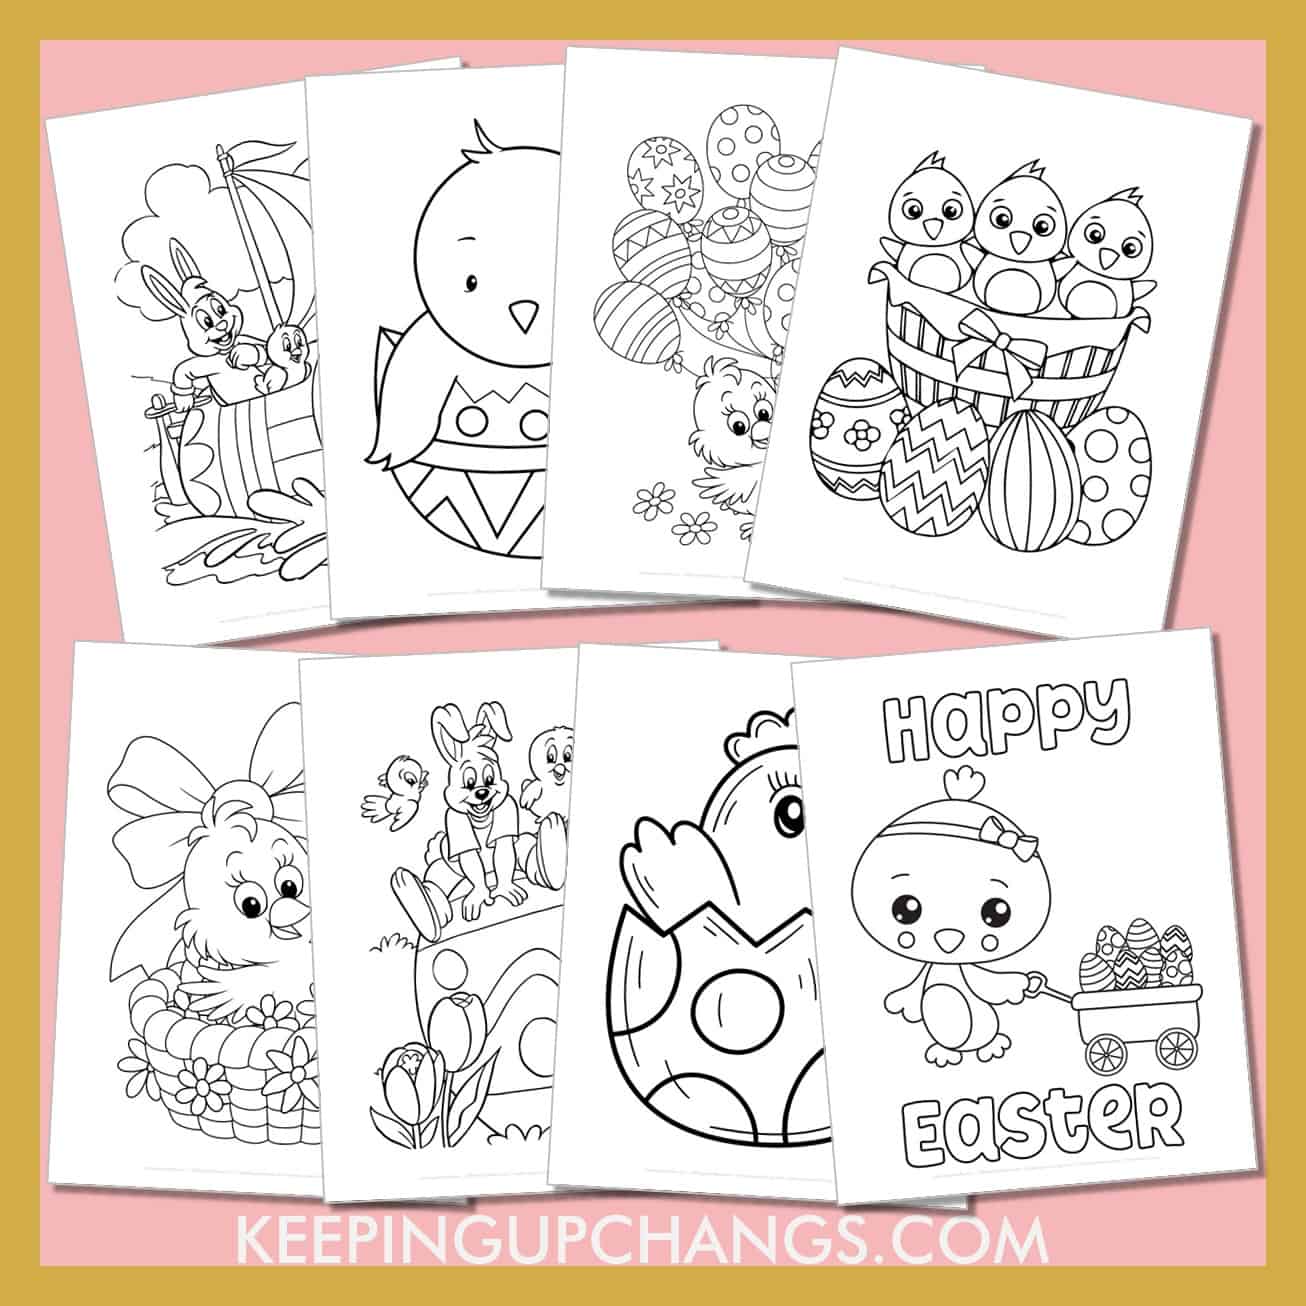 free easter chick pictures to color for toddlers, kids, adults.